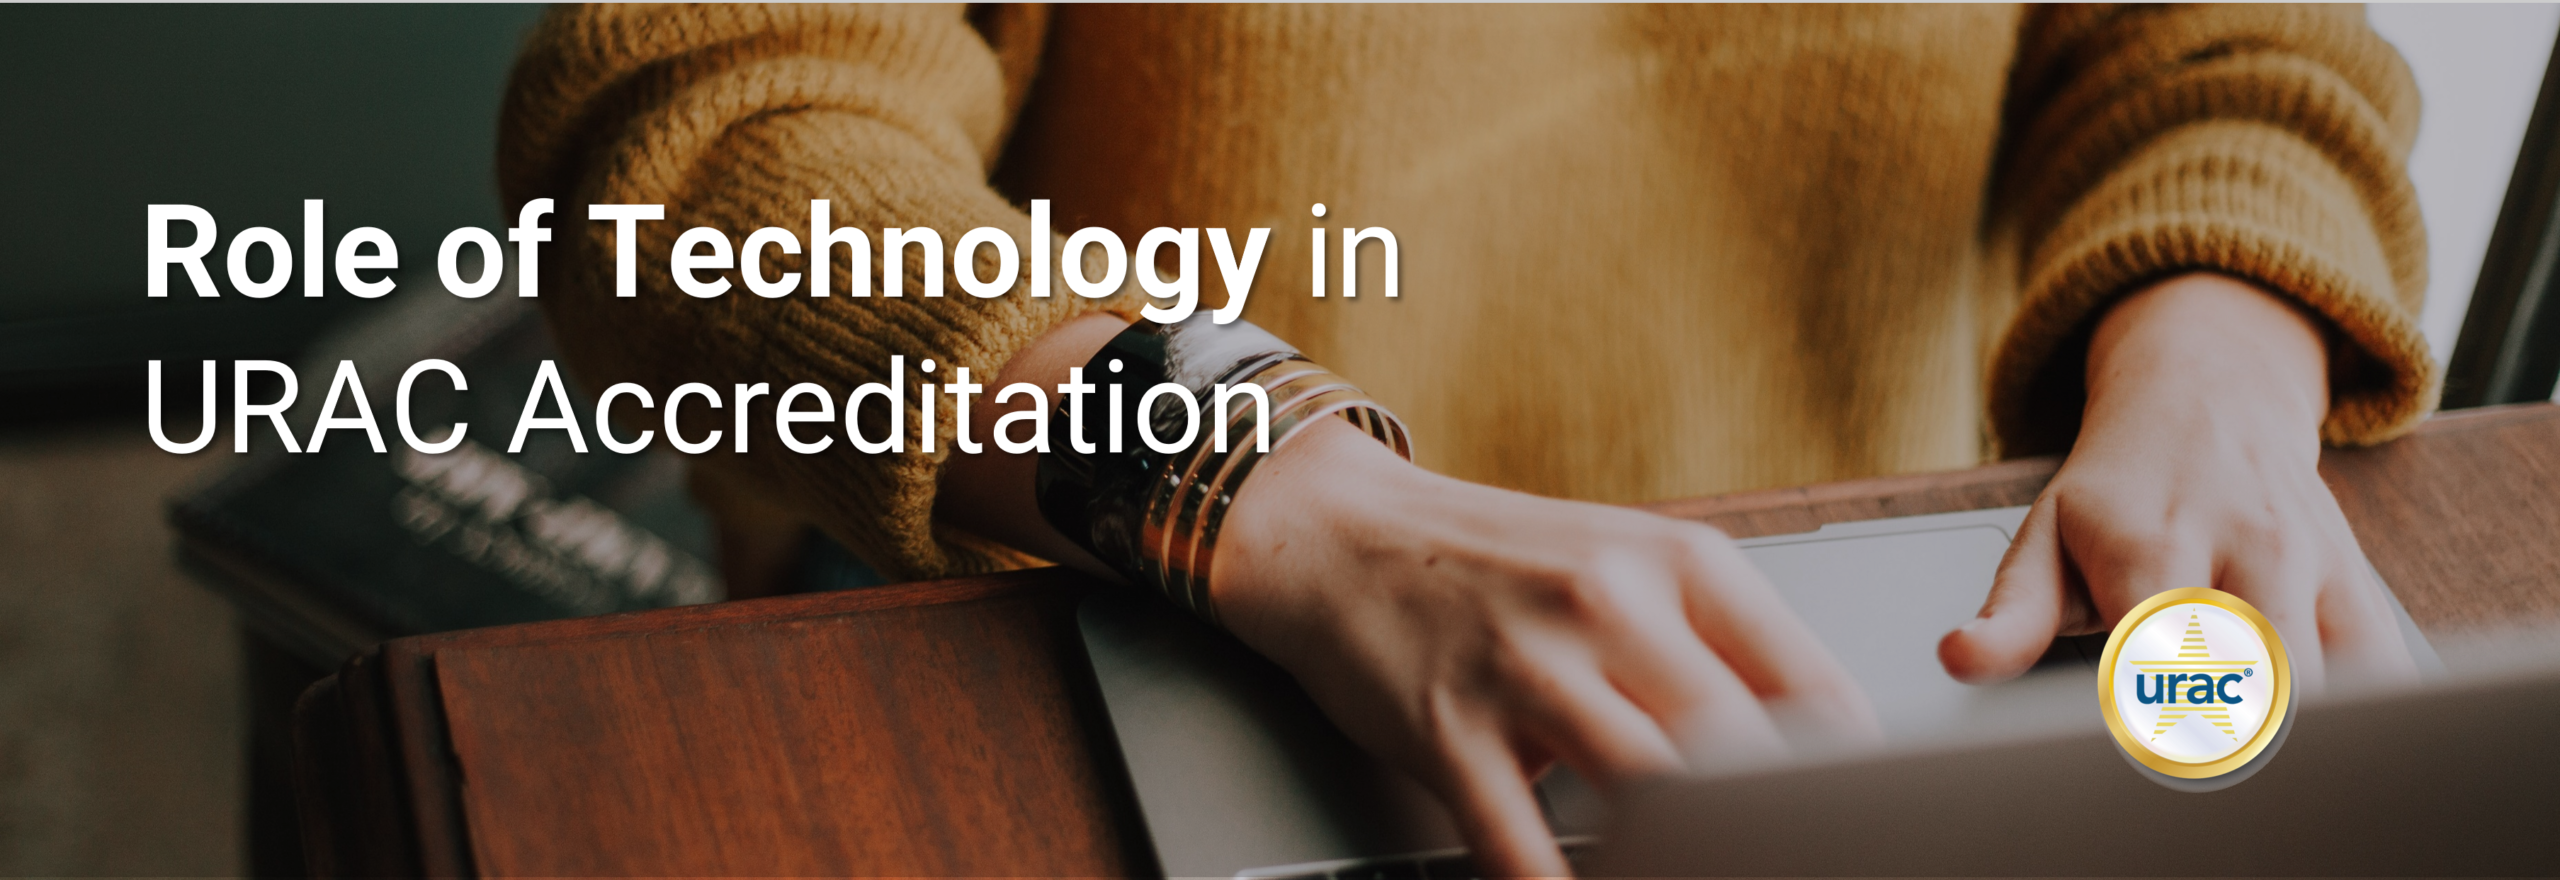 Role of Technology in URAC Accreditation